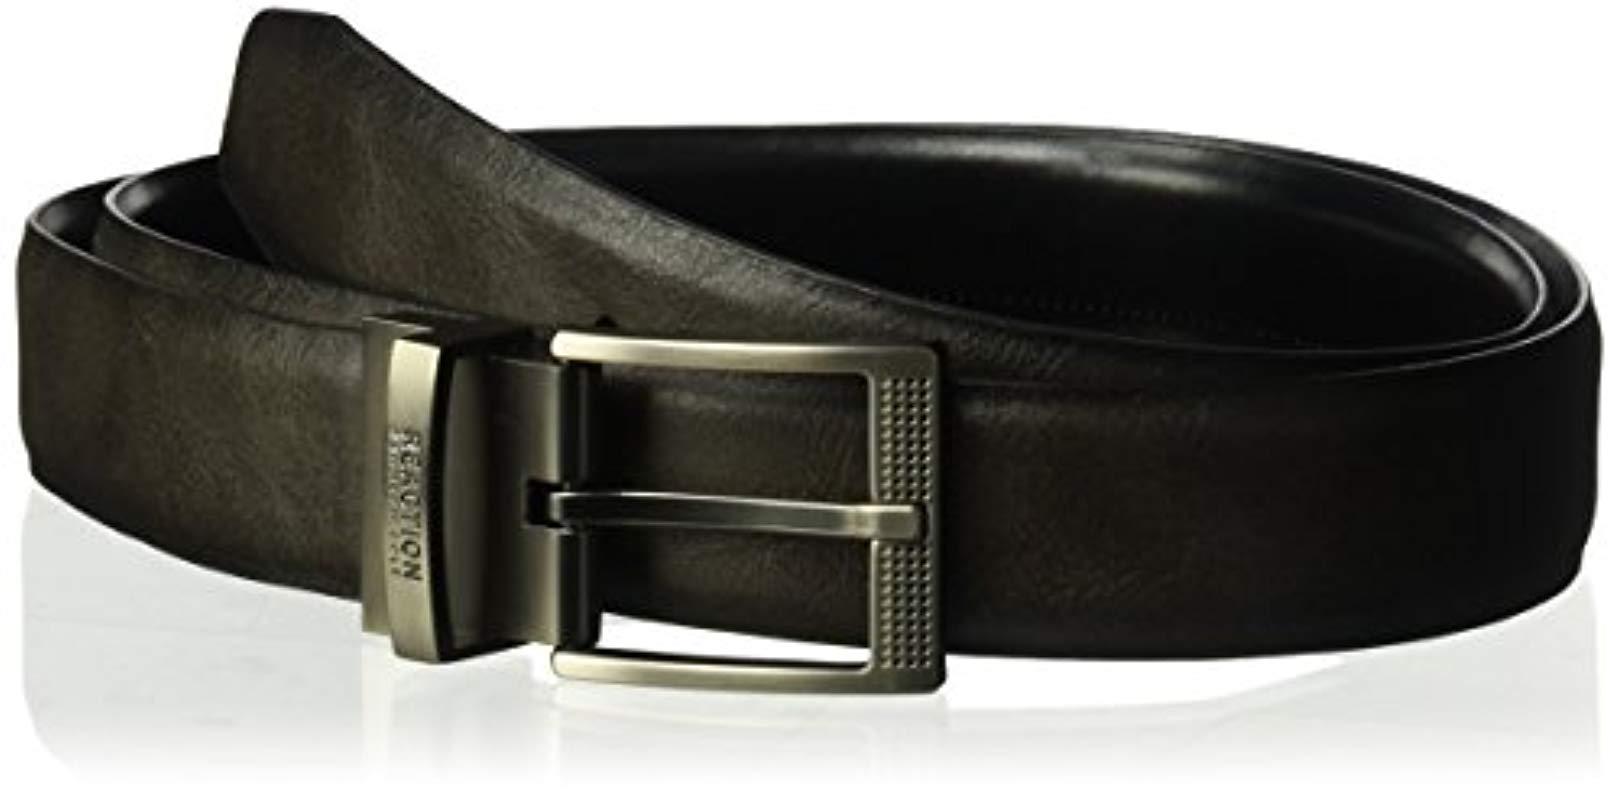 Lyst - Kenneth Cole Reaction Brown Dress Belt With Gunmetal Buckle in Black for Men - Save 42%